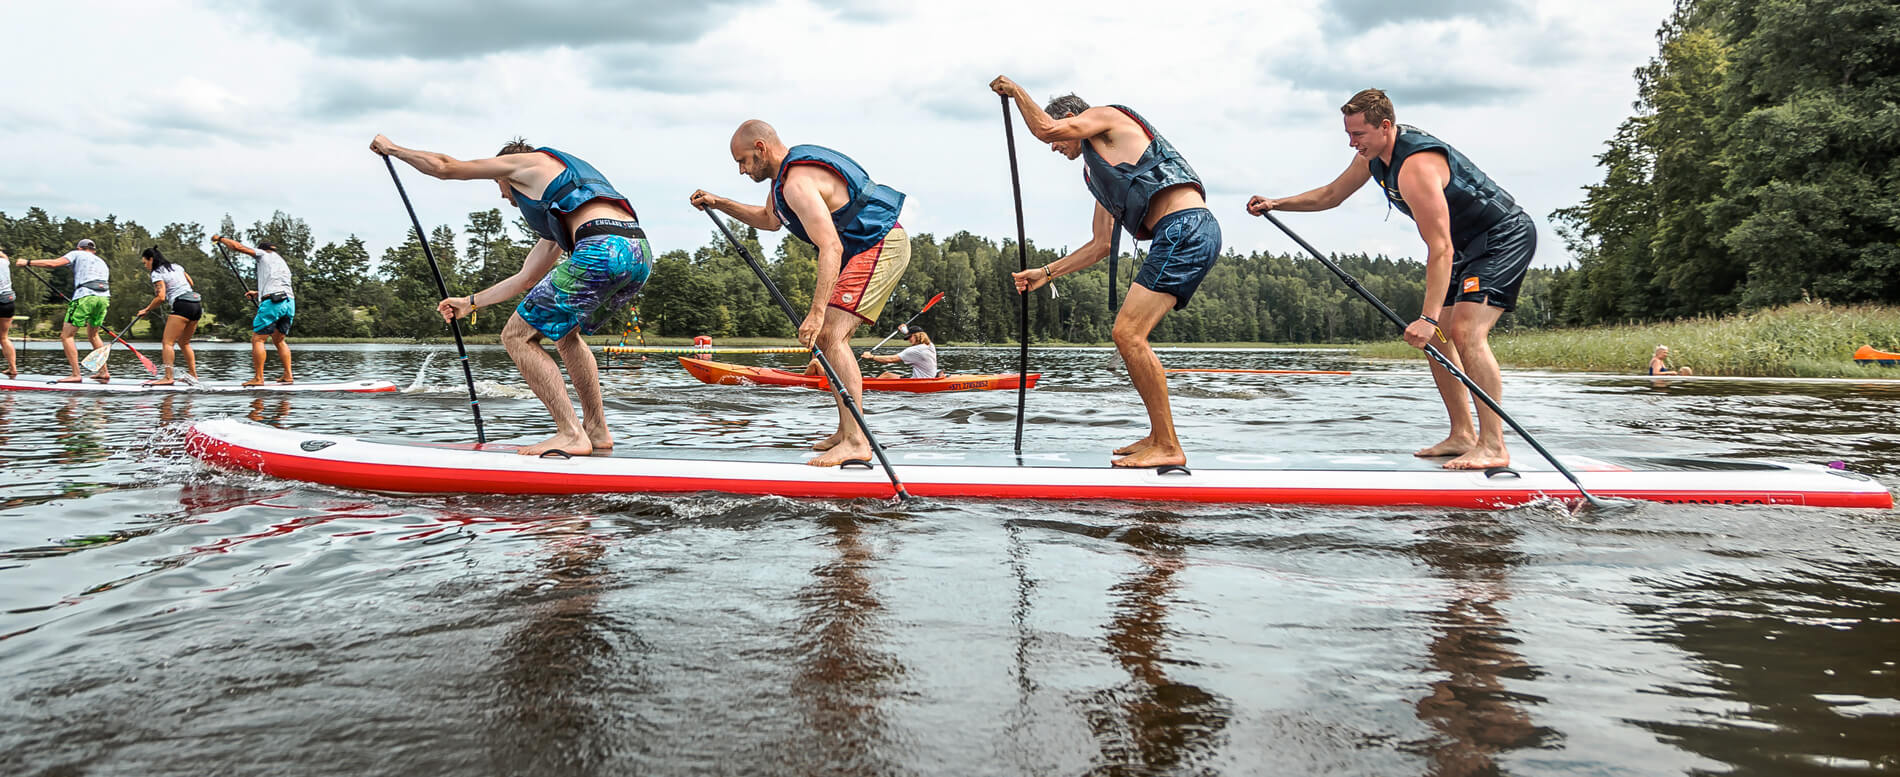 Getting Started with SUP Racing: A Beginner’s Guide